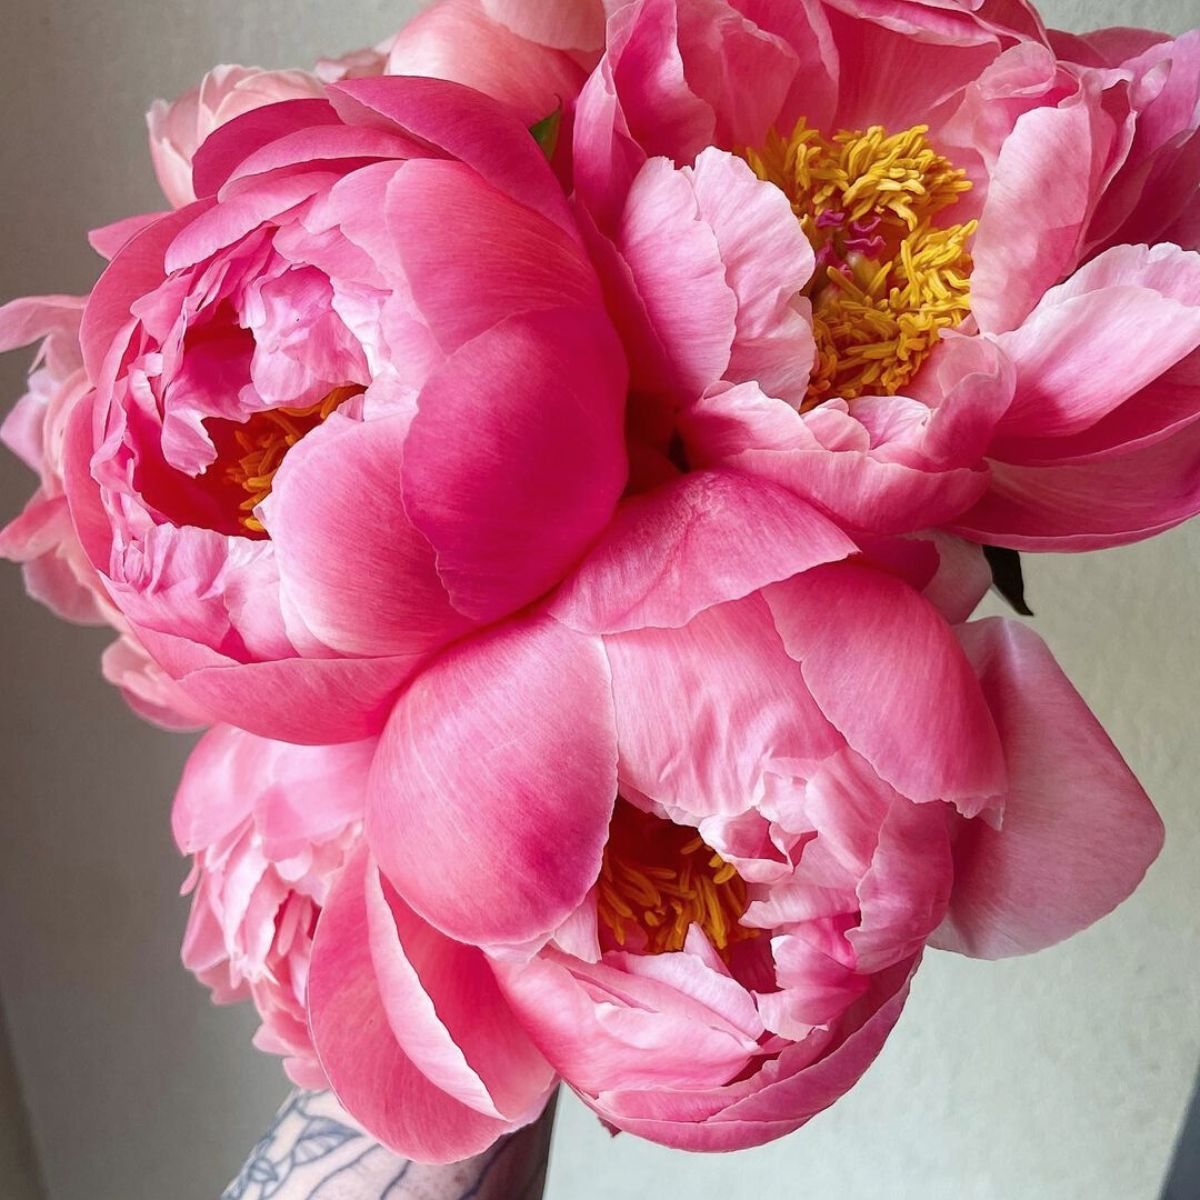 Peonies are one of the most popular flowers in the world